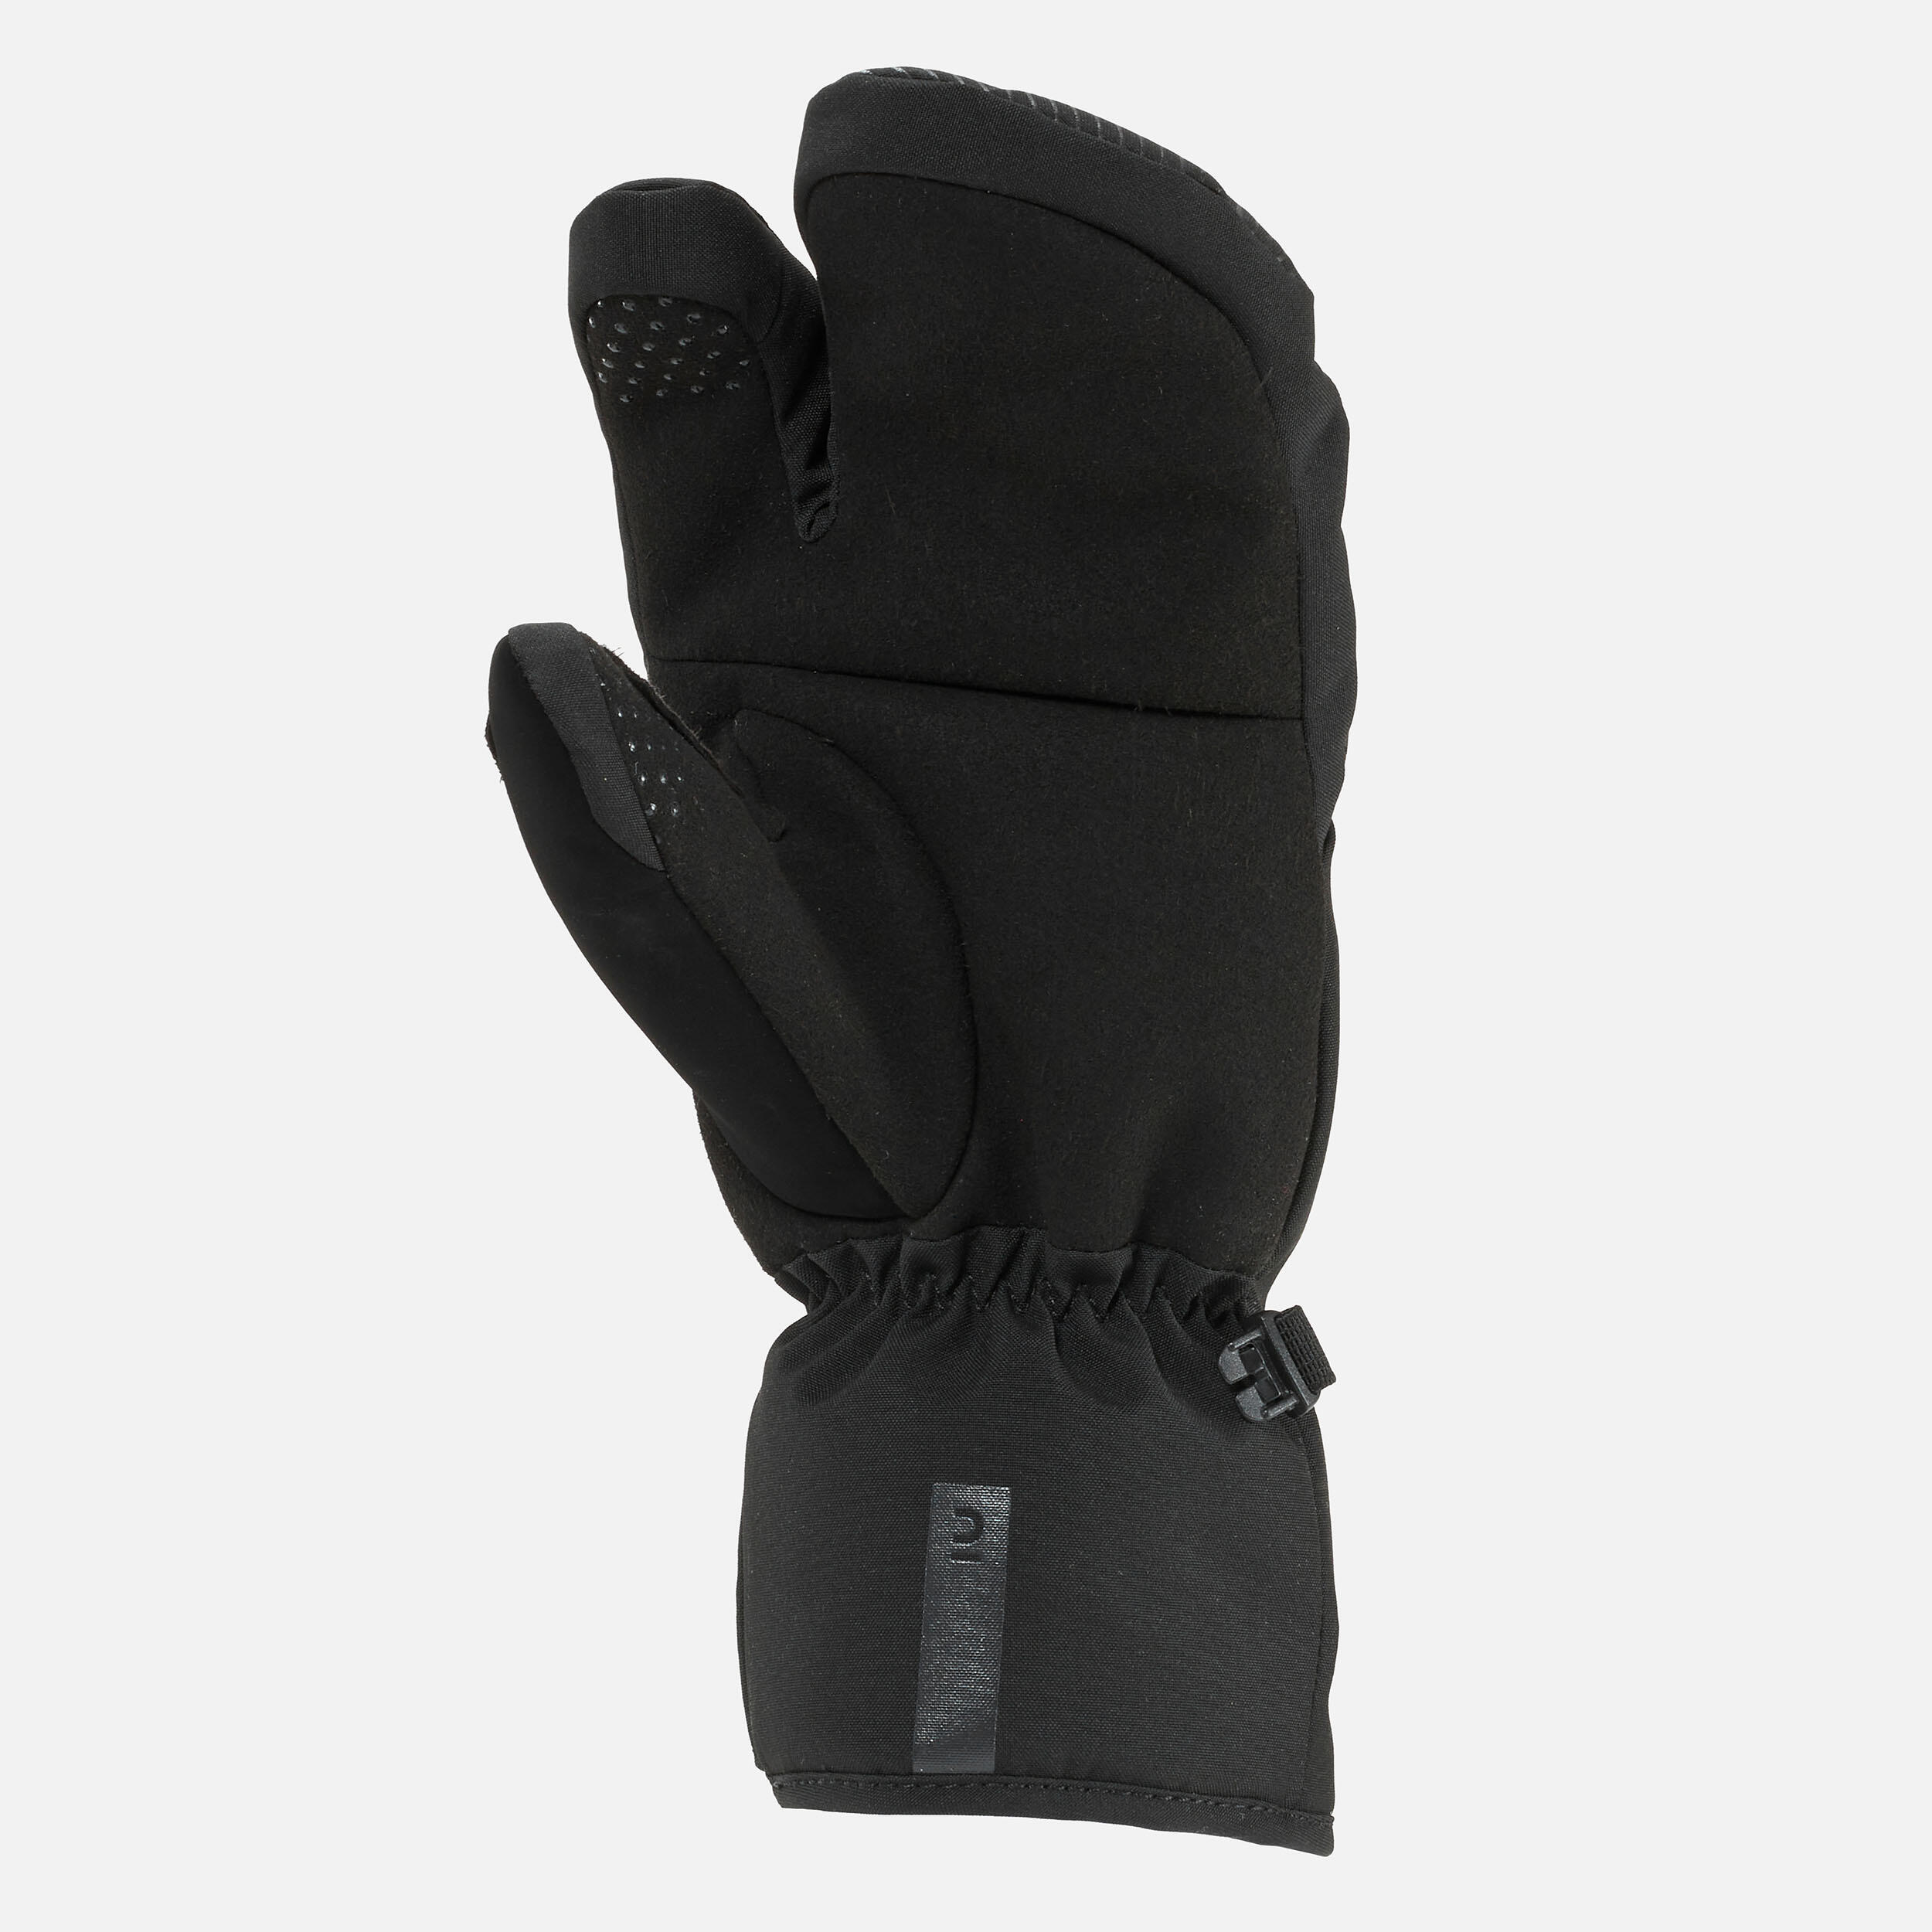 Kids' cross-country skiing warm gloves 3/6